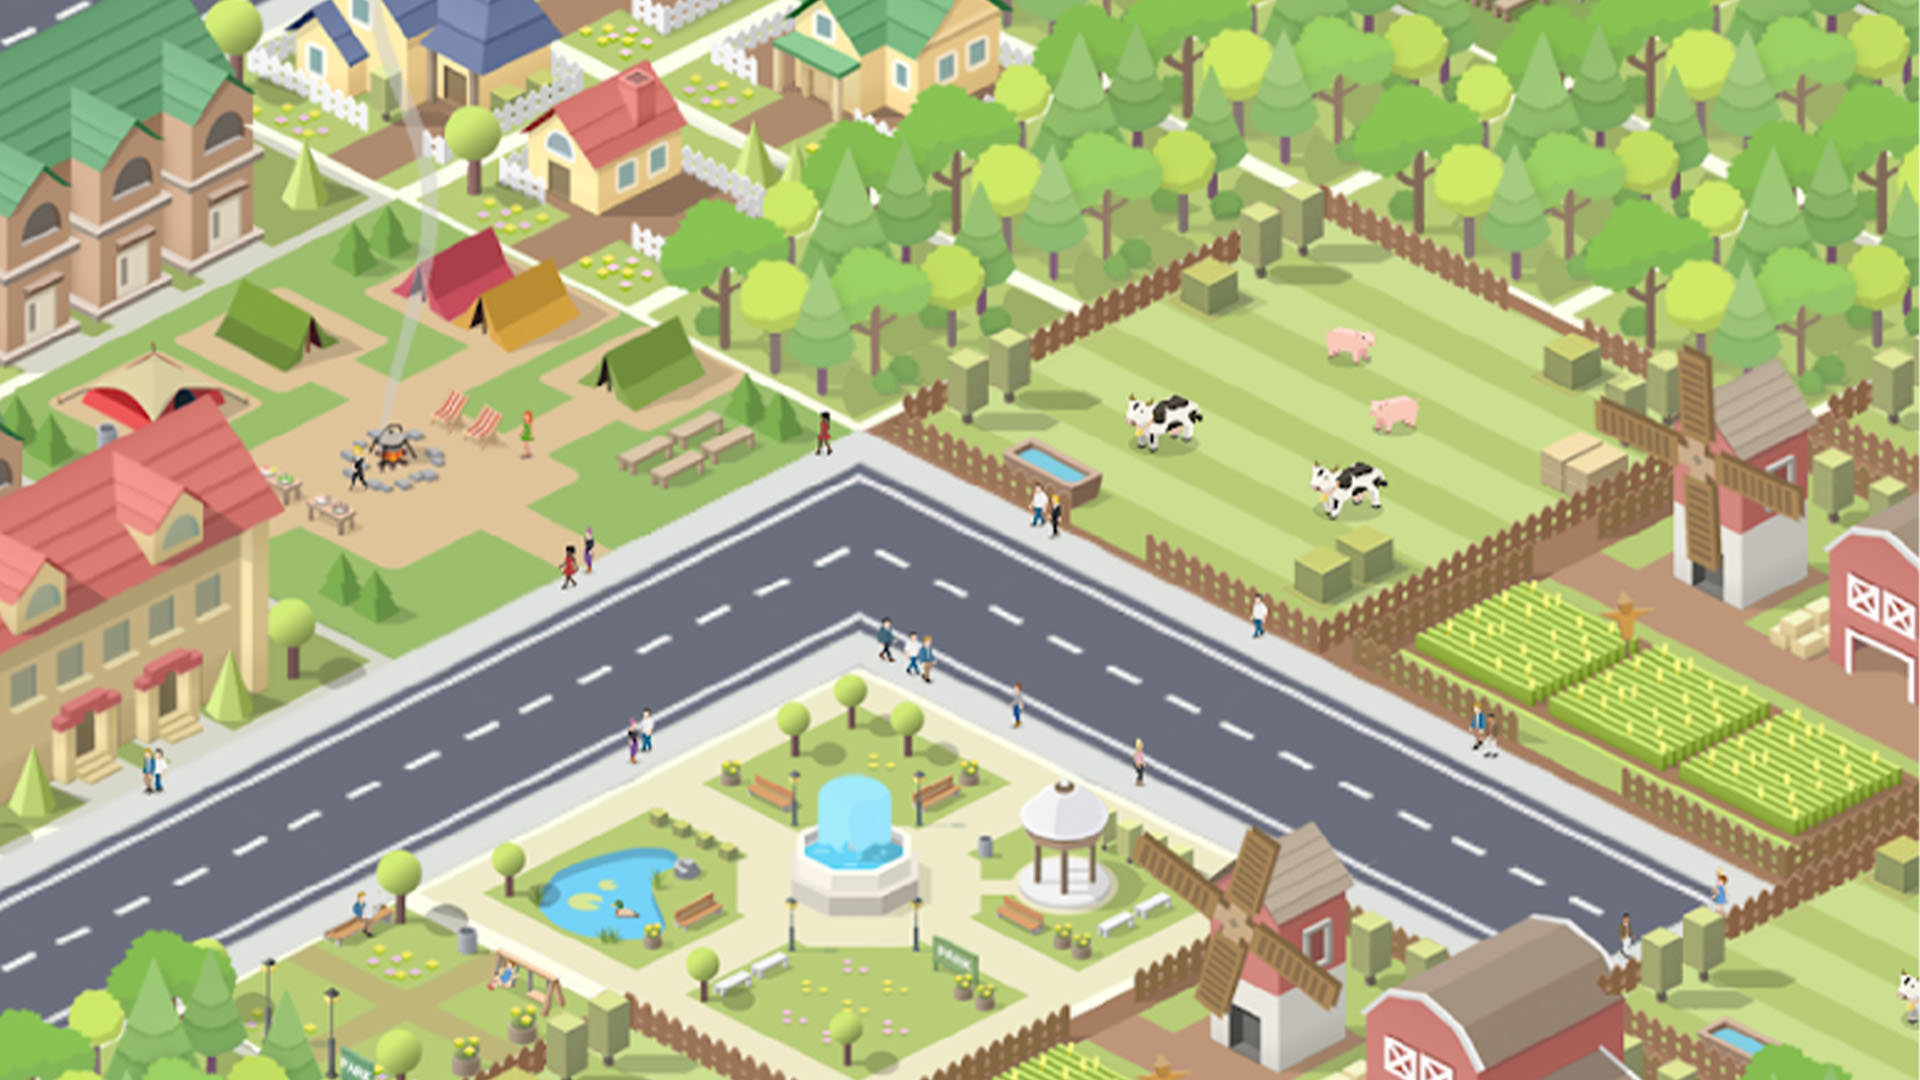 The 10 Best Building Games for Offline Play